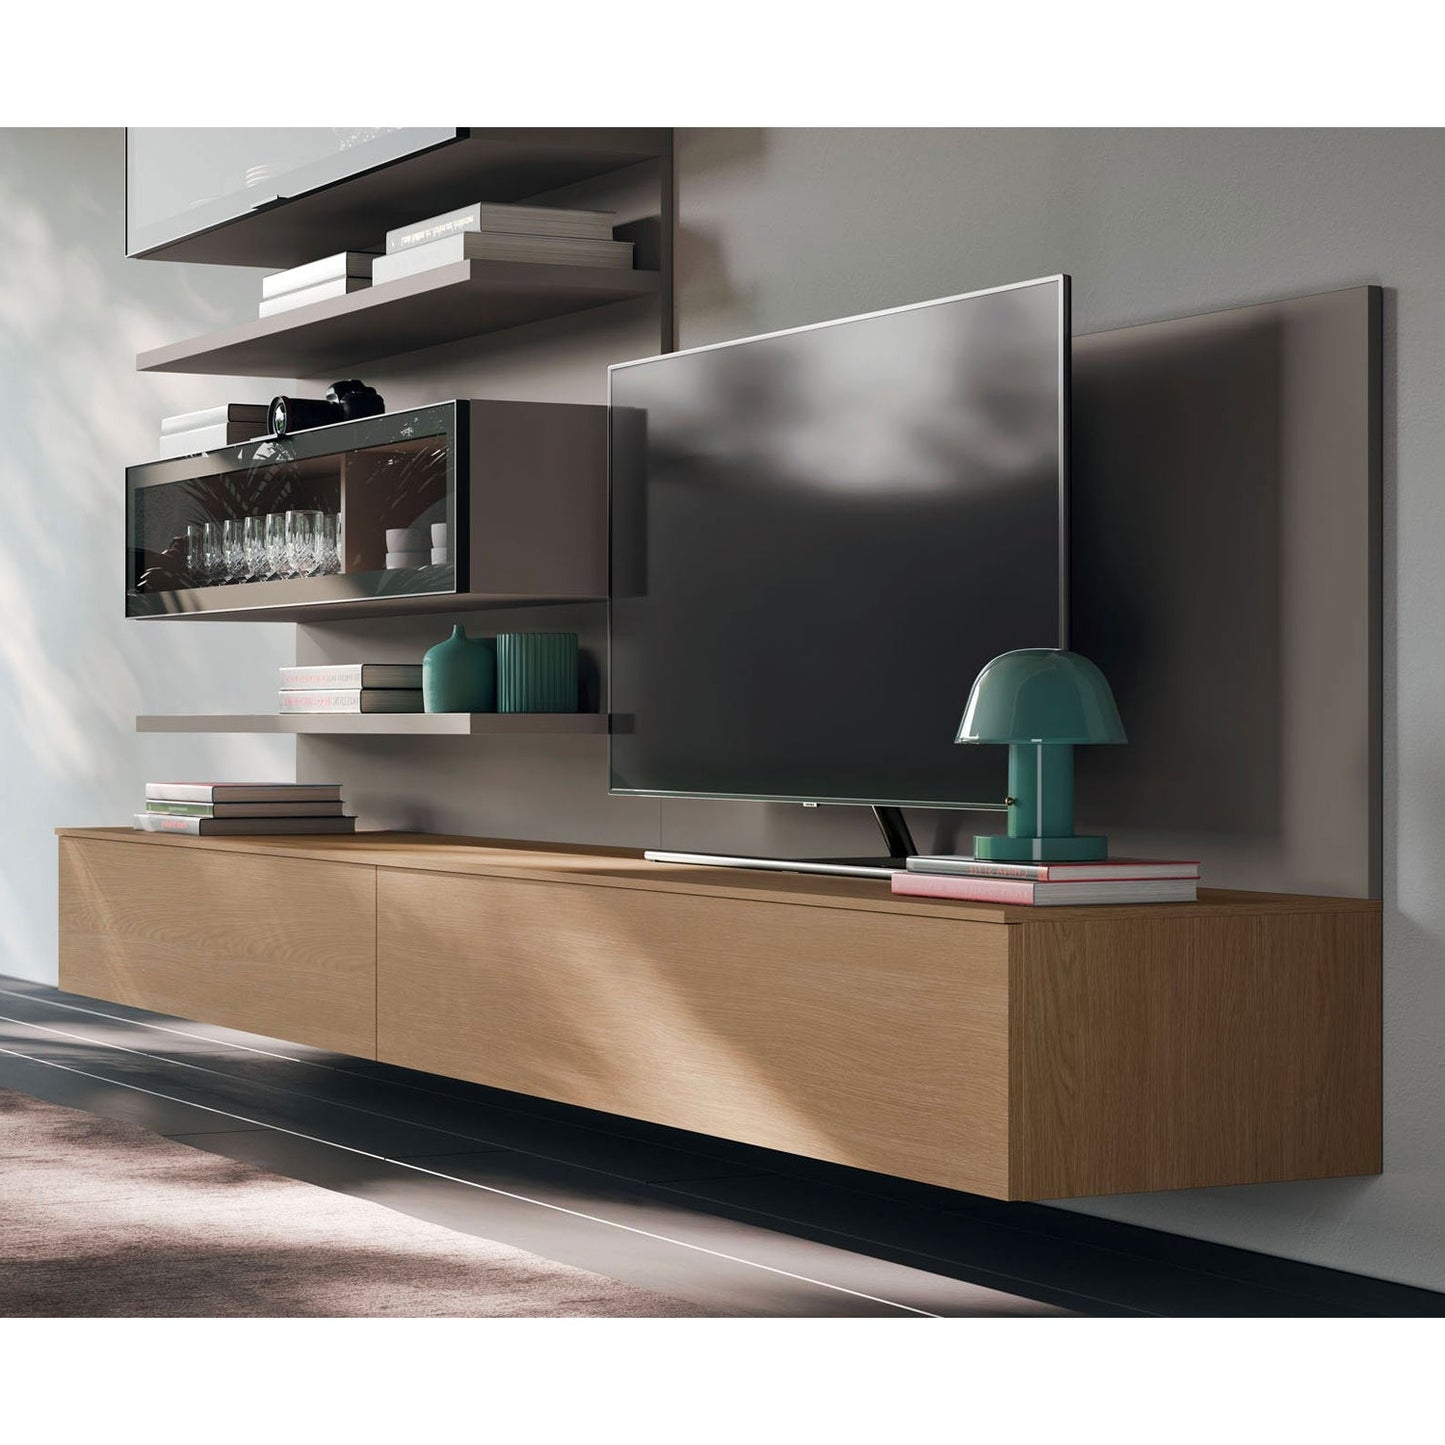 Light Day 16 Tv media unit with boiserie by Orme Design